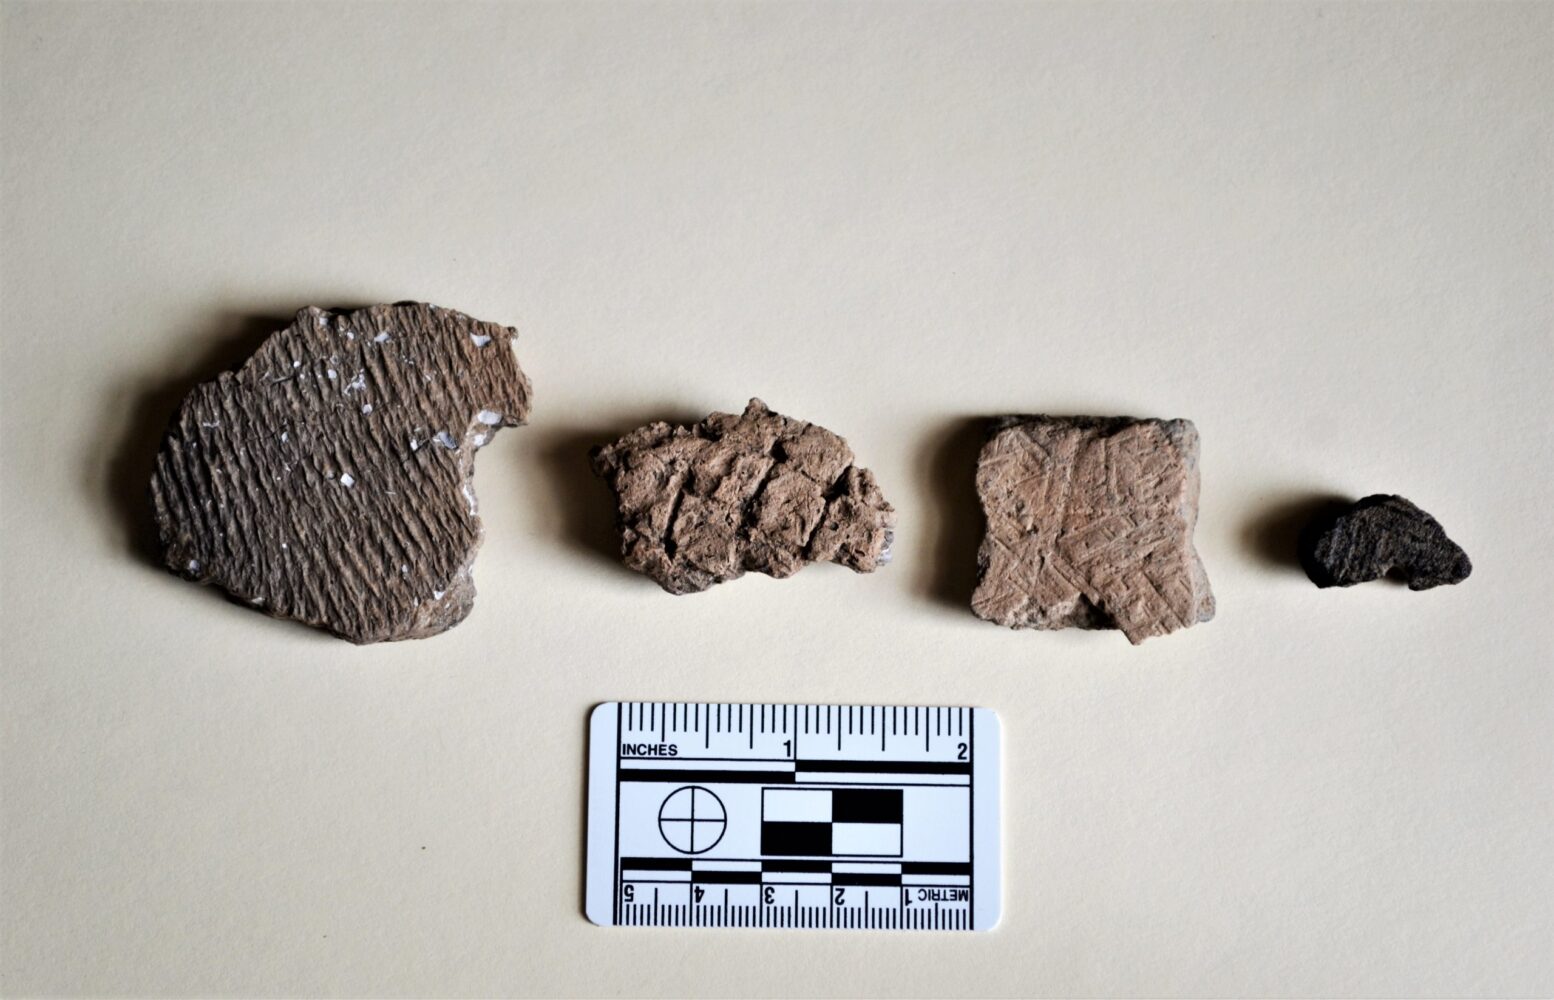 Native American pottery fragments from the Palmer Robinson rockshelter